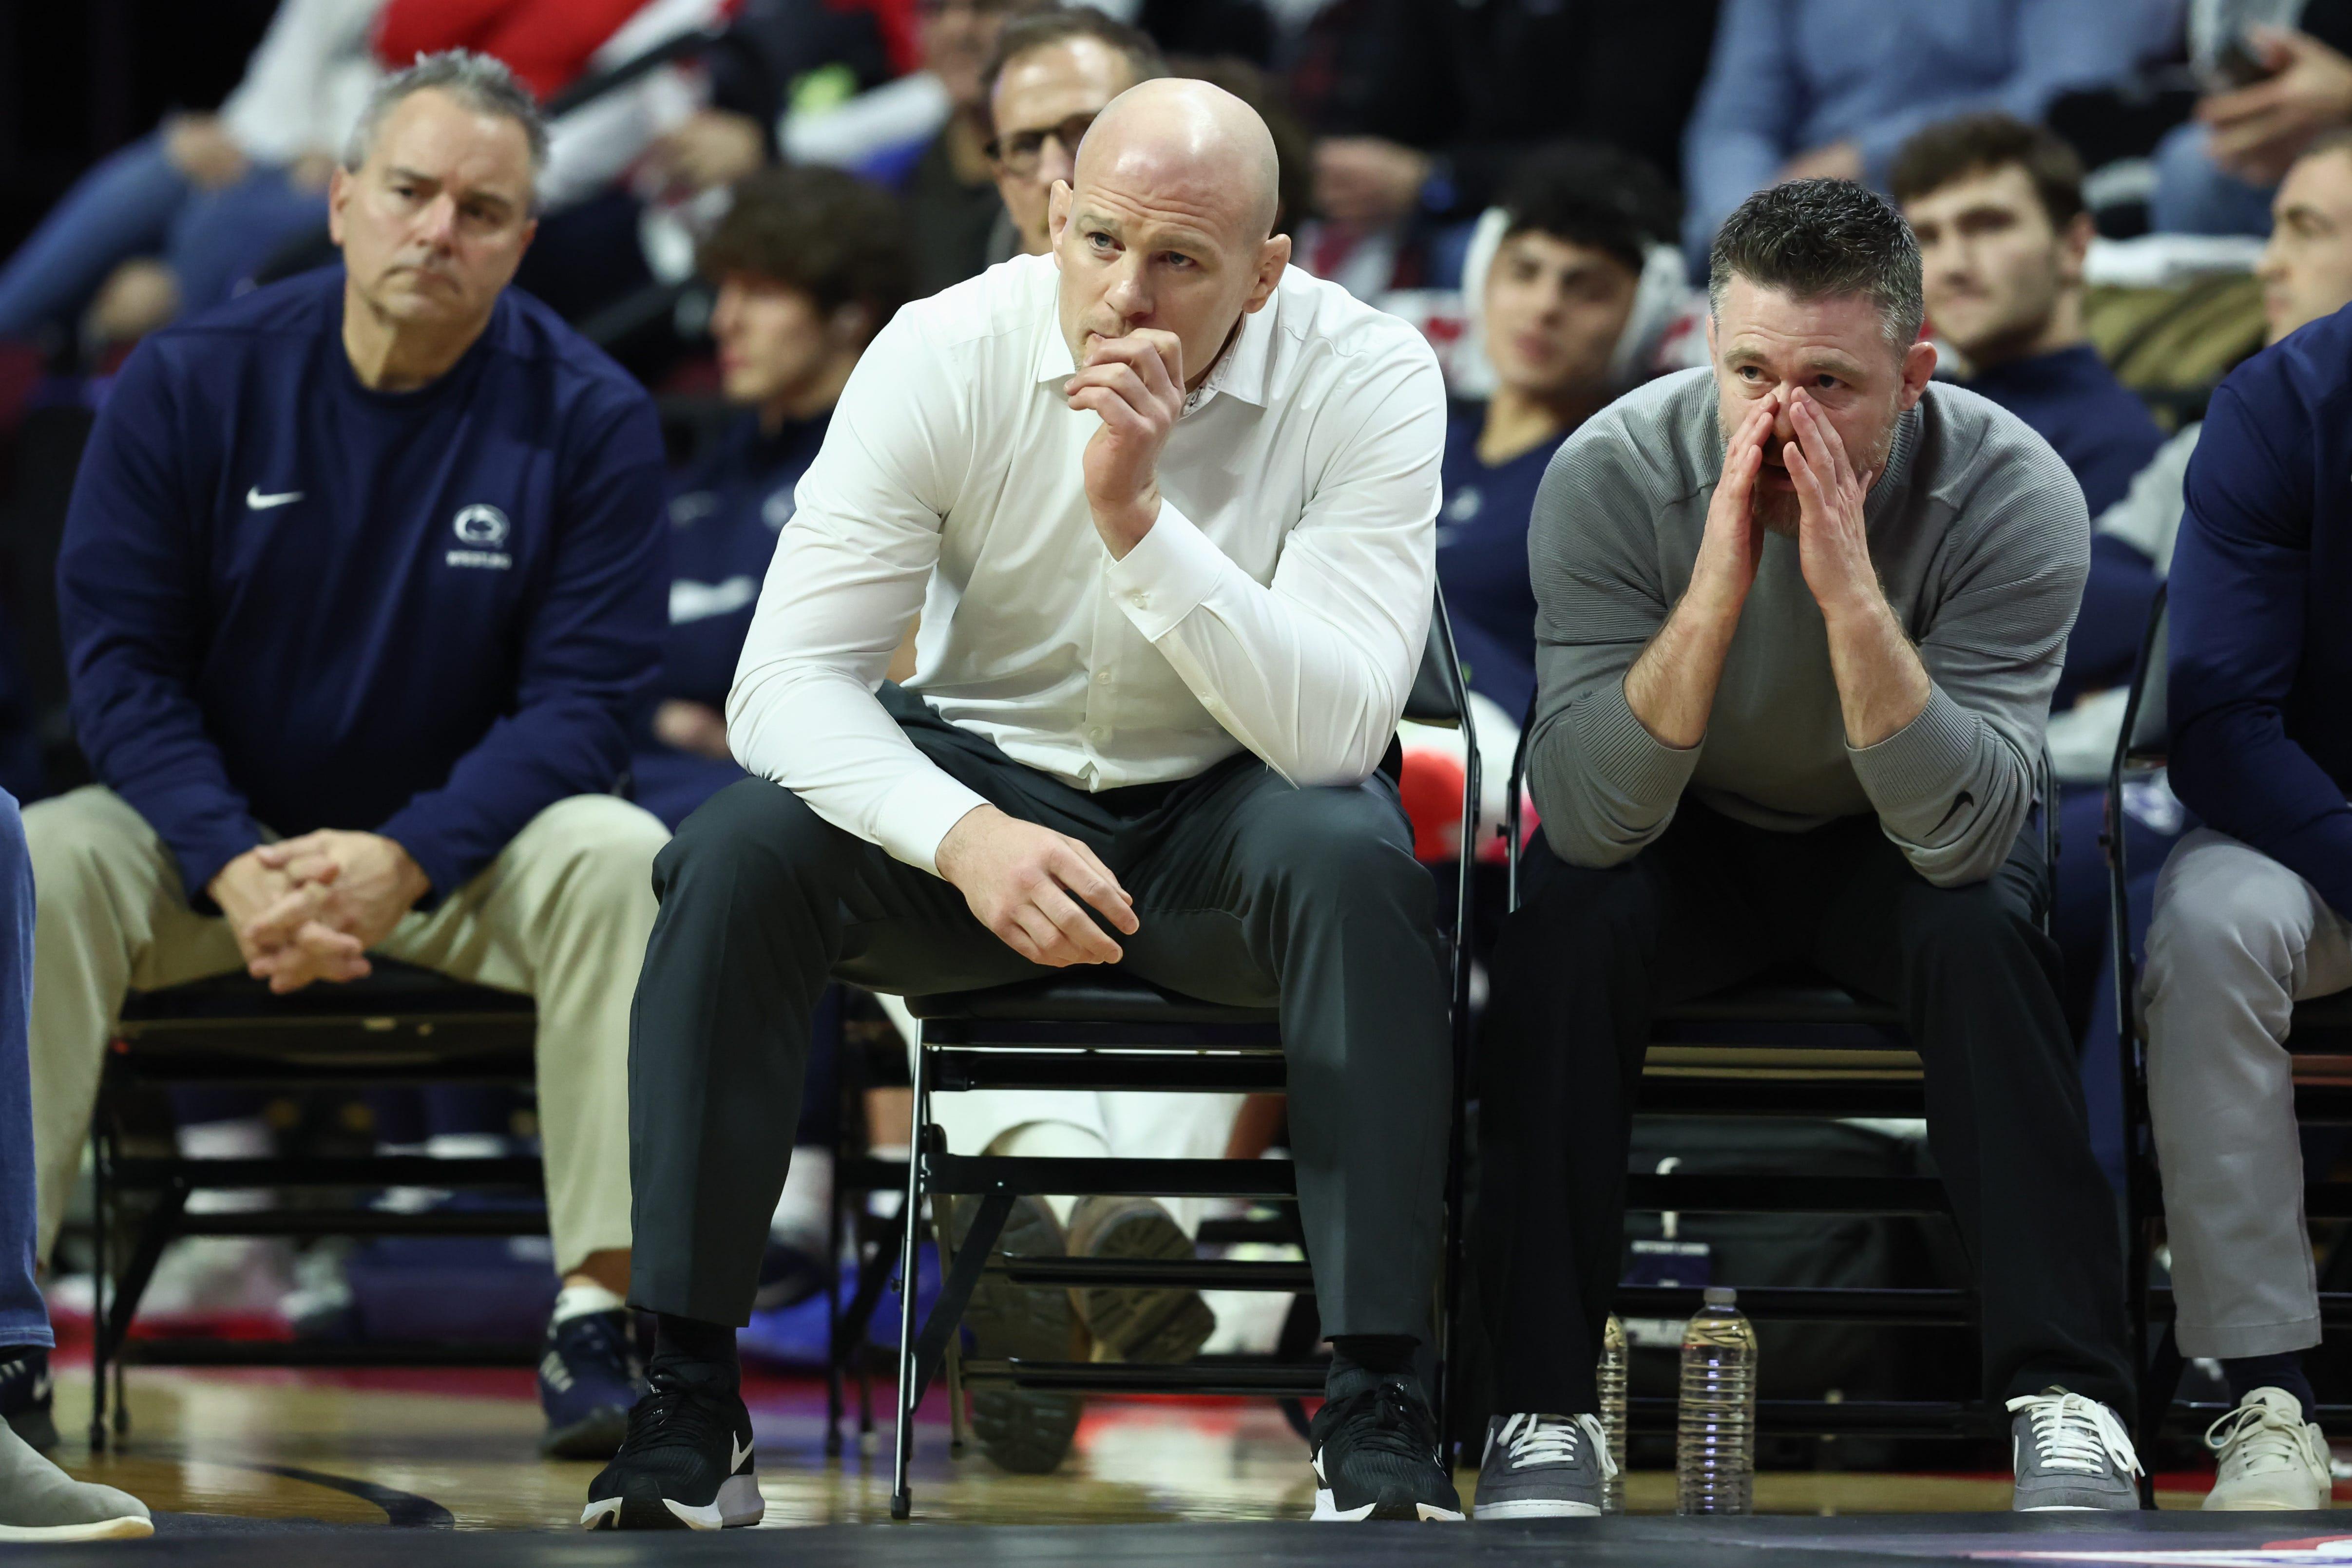 Feb 10, 2023; Piscataway, NJ, USA; Penn State Nittany Lions head coach Cael Sanderson (center) looks on during the match against the Rutgers Scarlet Knights at Jersey Mike’s Arena. Mandatory Credit: Vincent Carchietta-USA TODAY Sports